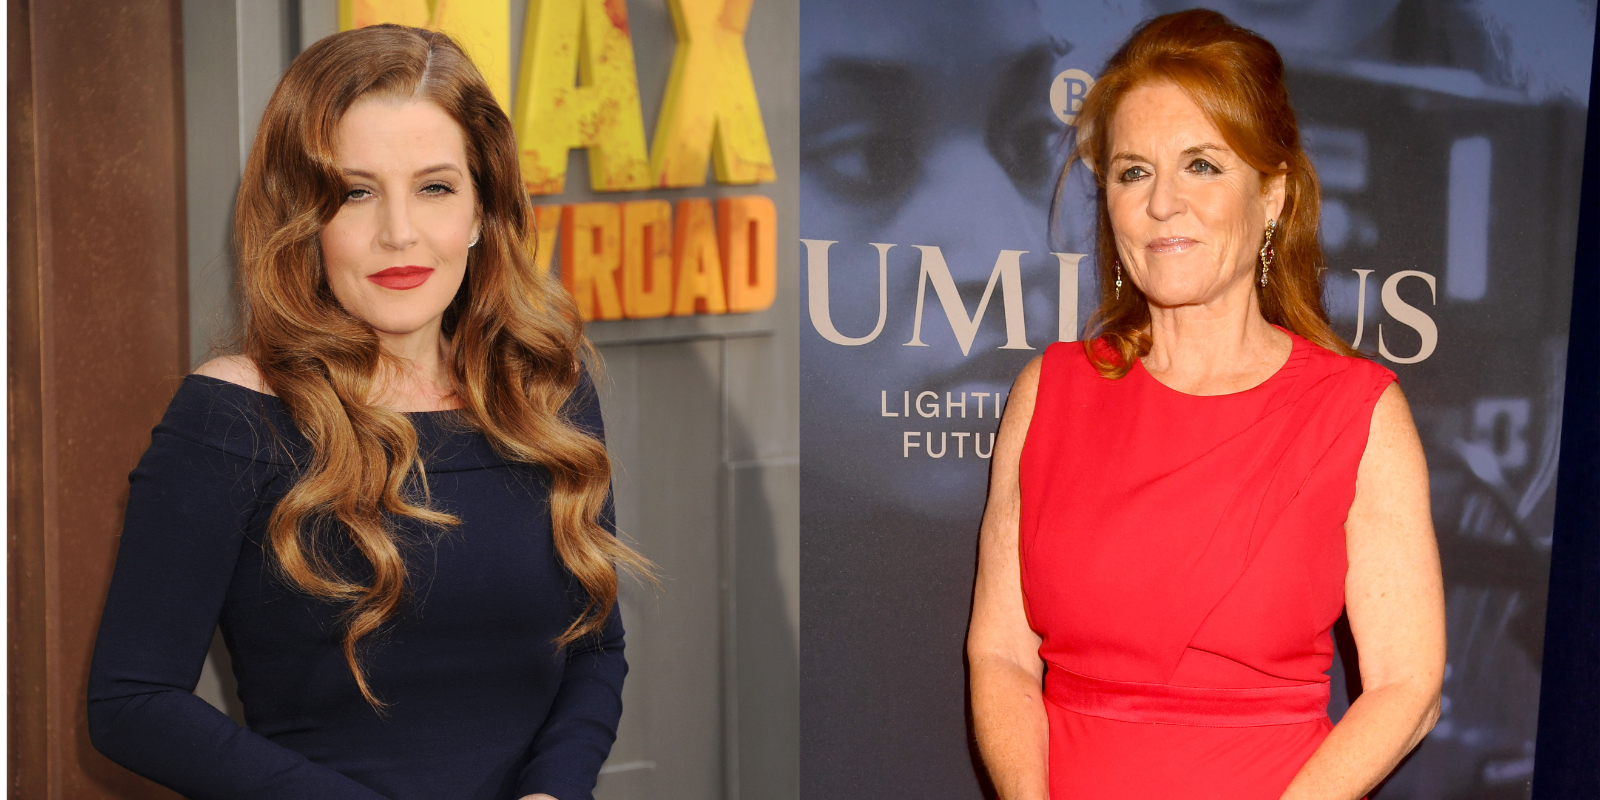 Lisa Marie Presley and Sarah Ferguson in side-by-side photographs.